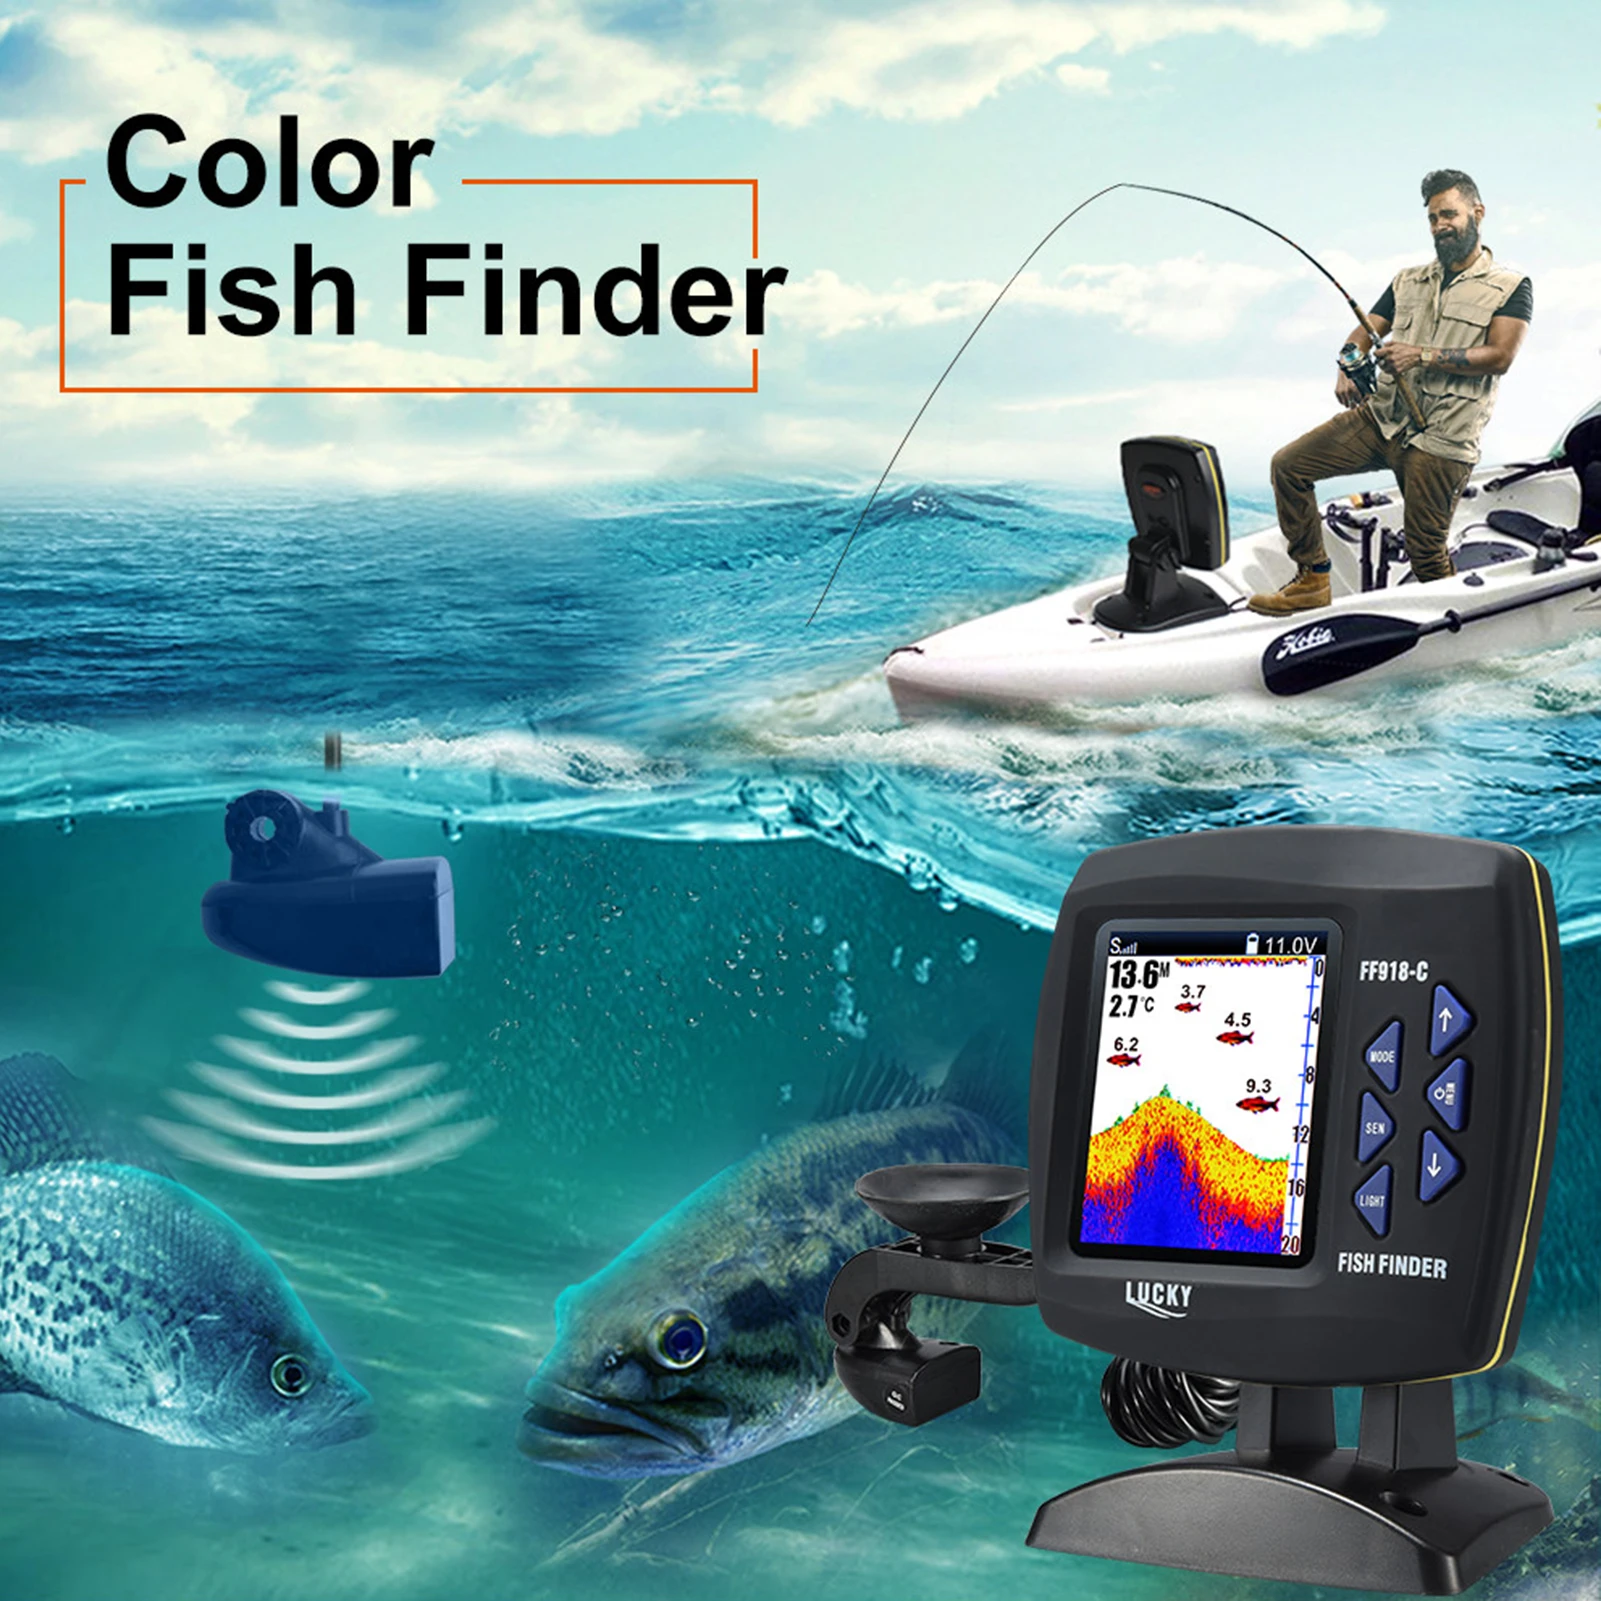 LUCKY Wired Fishing Finder 540ft/180m Depth Sounder Fish Detector F918-C180S Echo Sounder Locator Boat Fishfinder from a boat enlarge